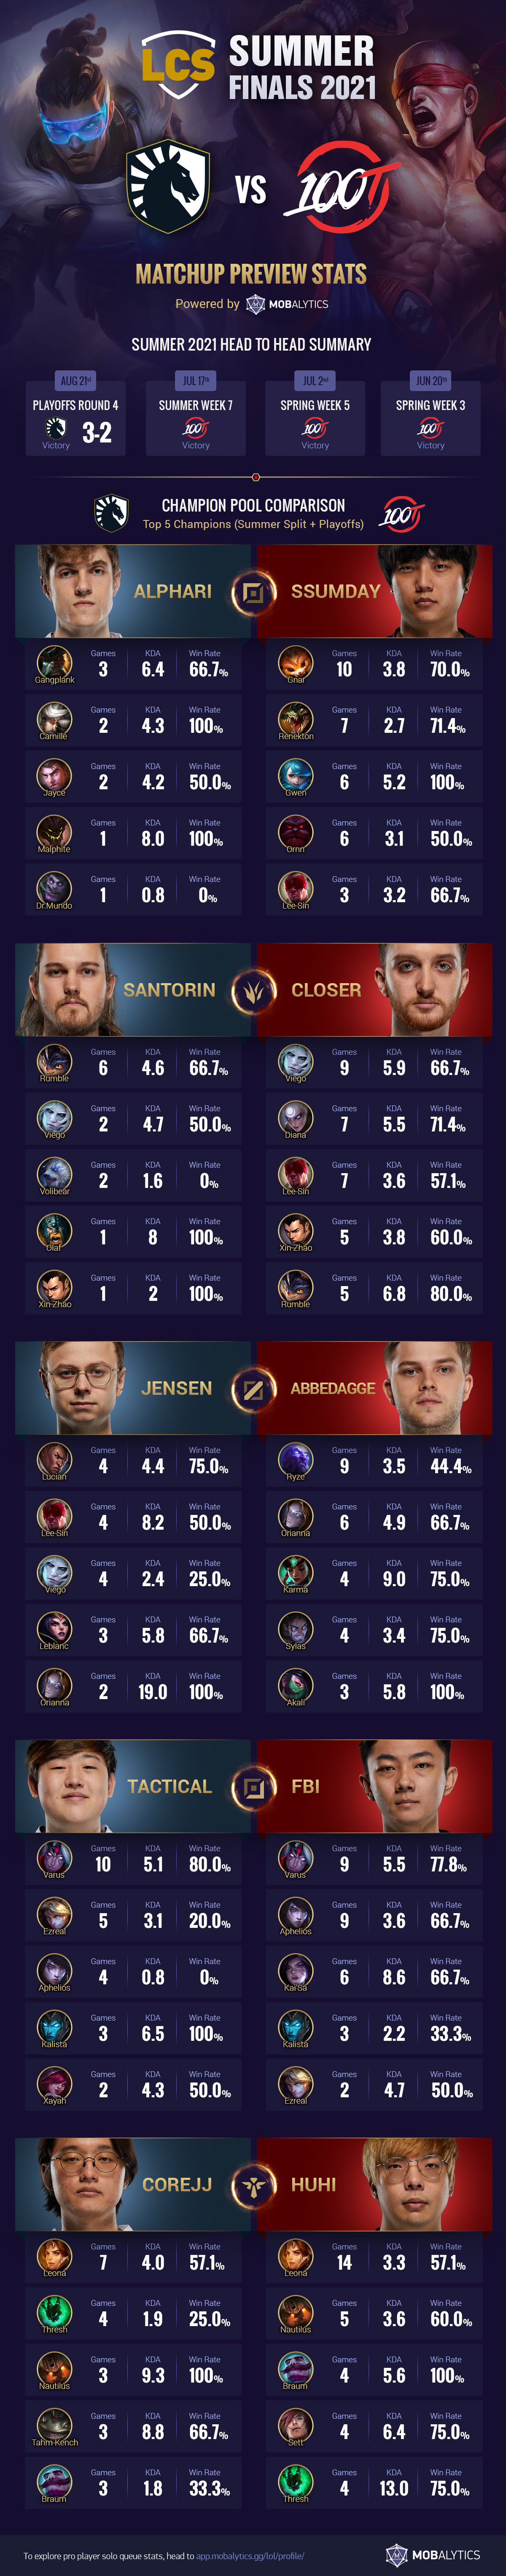 2021 LCS Summer Finals: TL vs 100T – Matchup Preview Stats (Infographic)